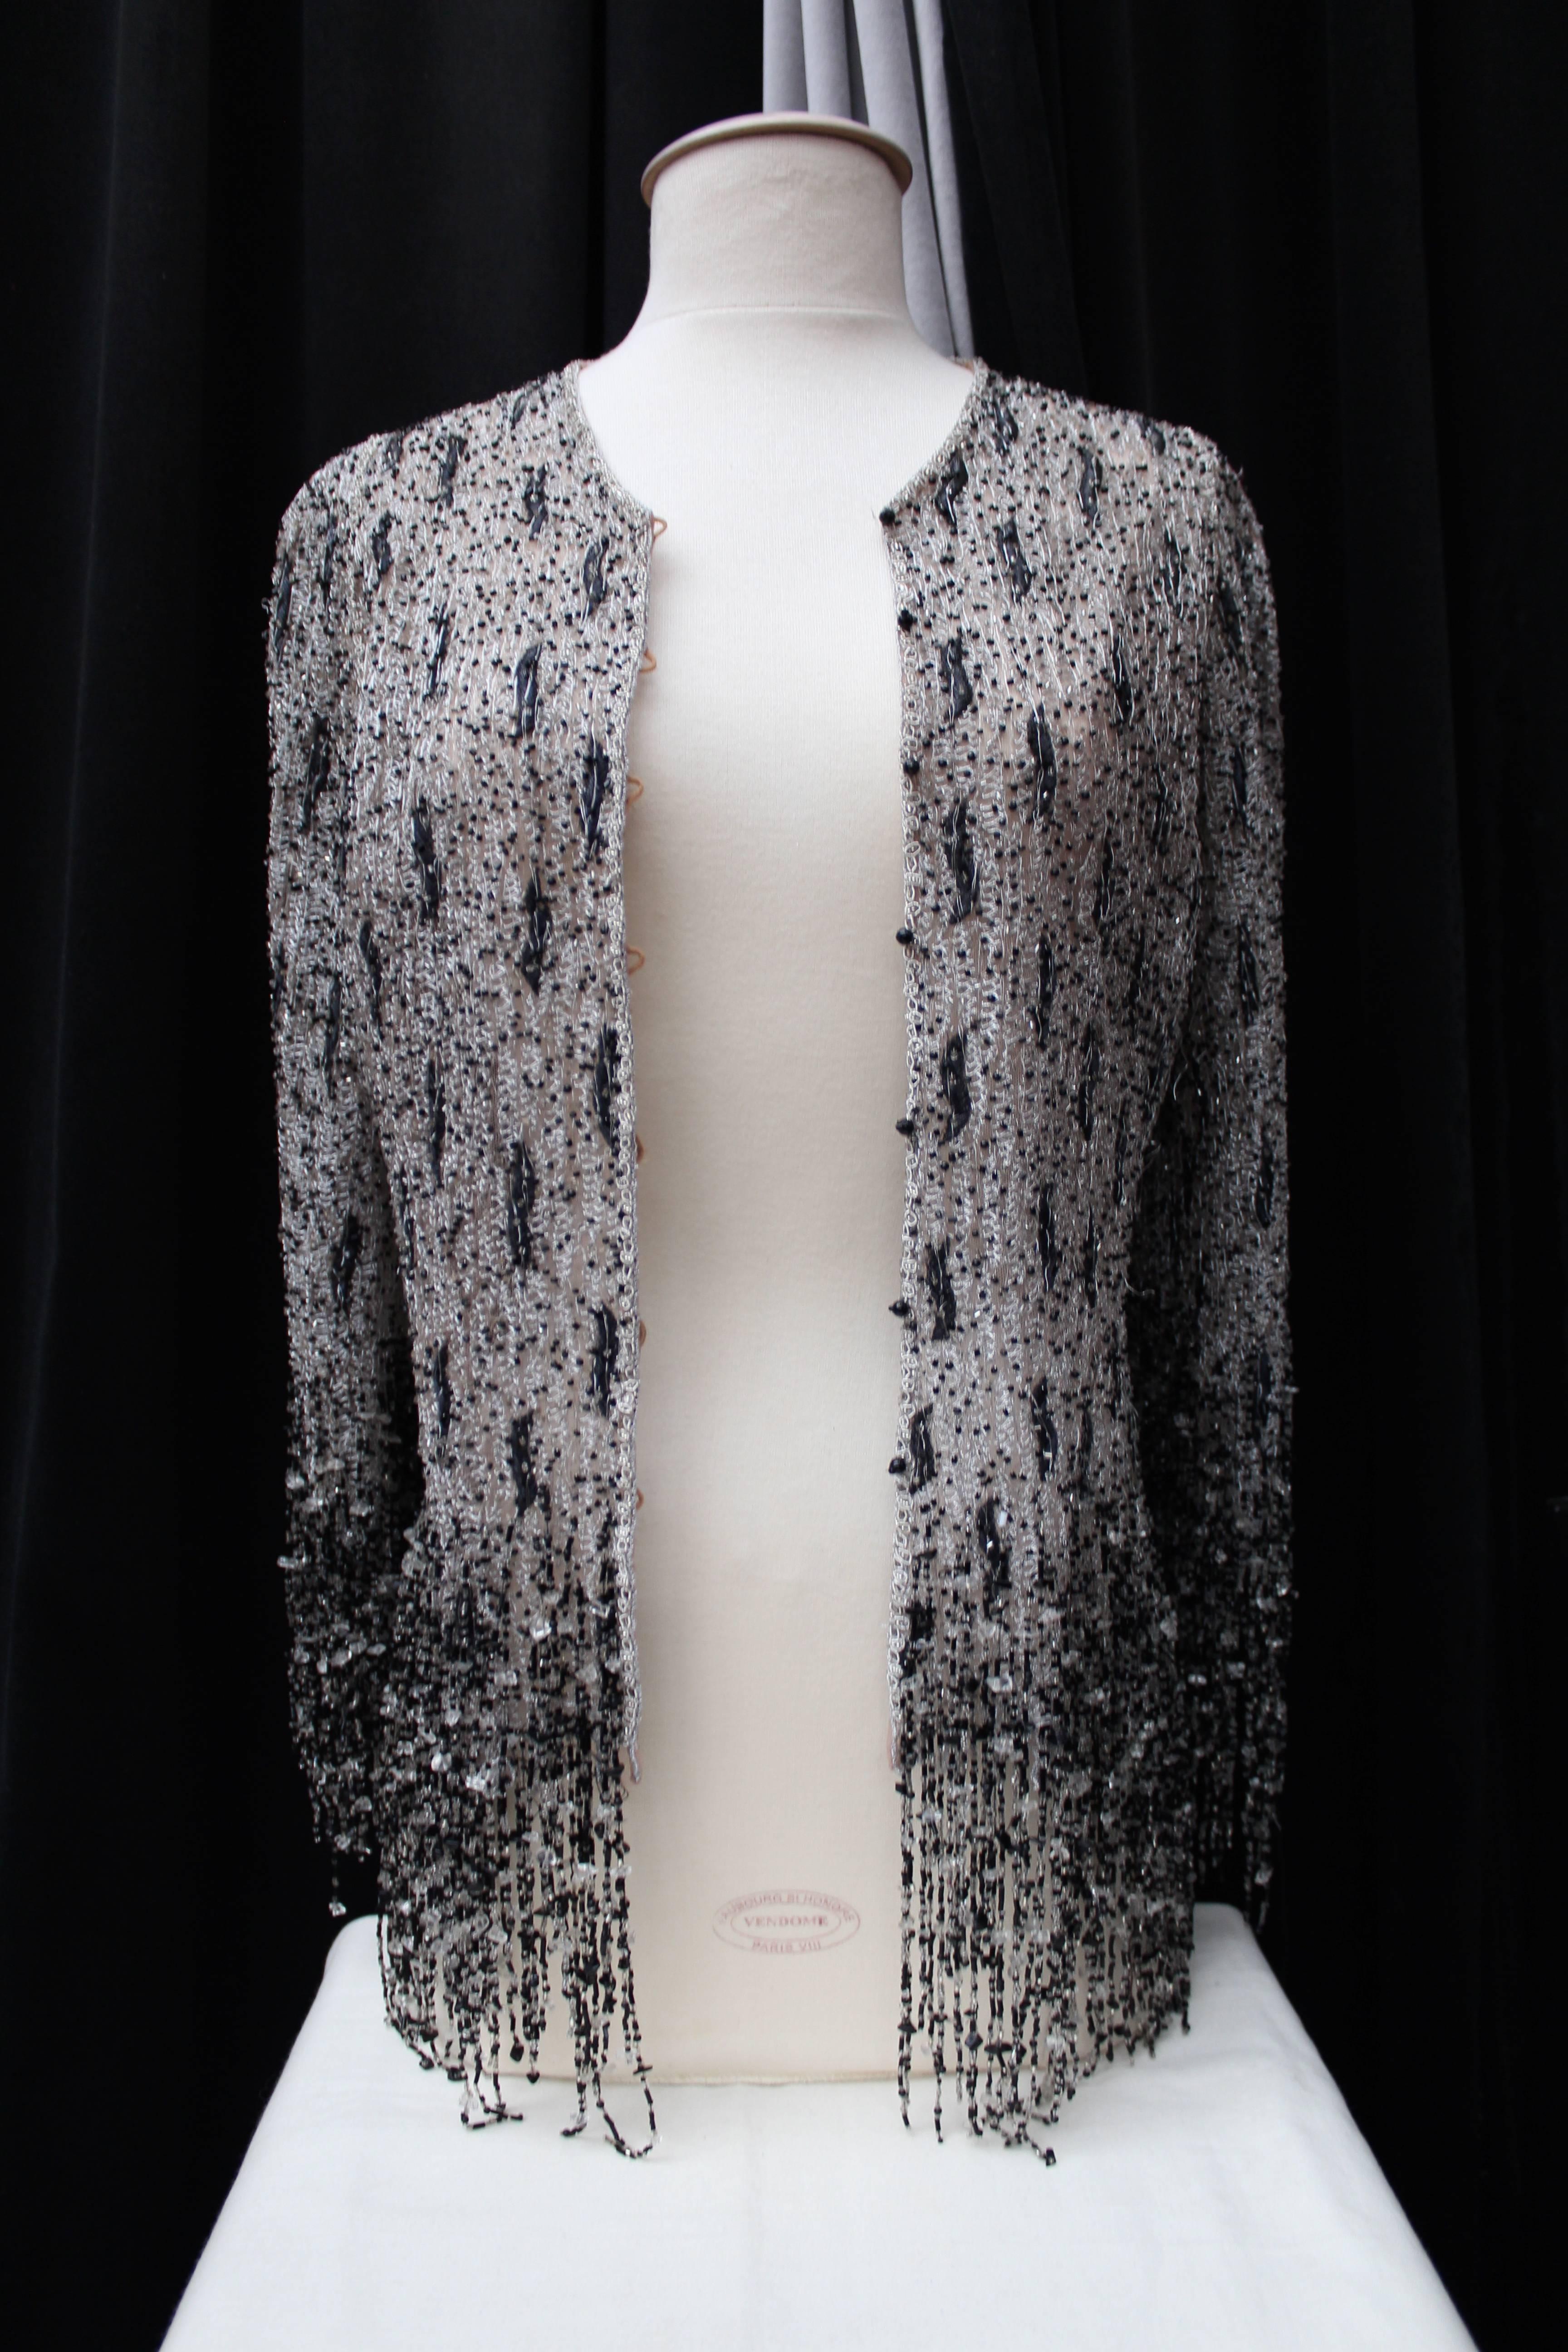 LECOANET HEMANT (Paris) Evening vest jacket with long sleeves made of tulle fully embroidered with silver thread and transparent and black beads as well as black thread sewed in a vegetable pattern. The jacket is finished at the armhole and bottom